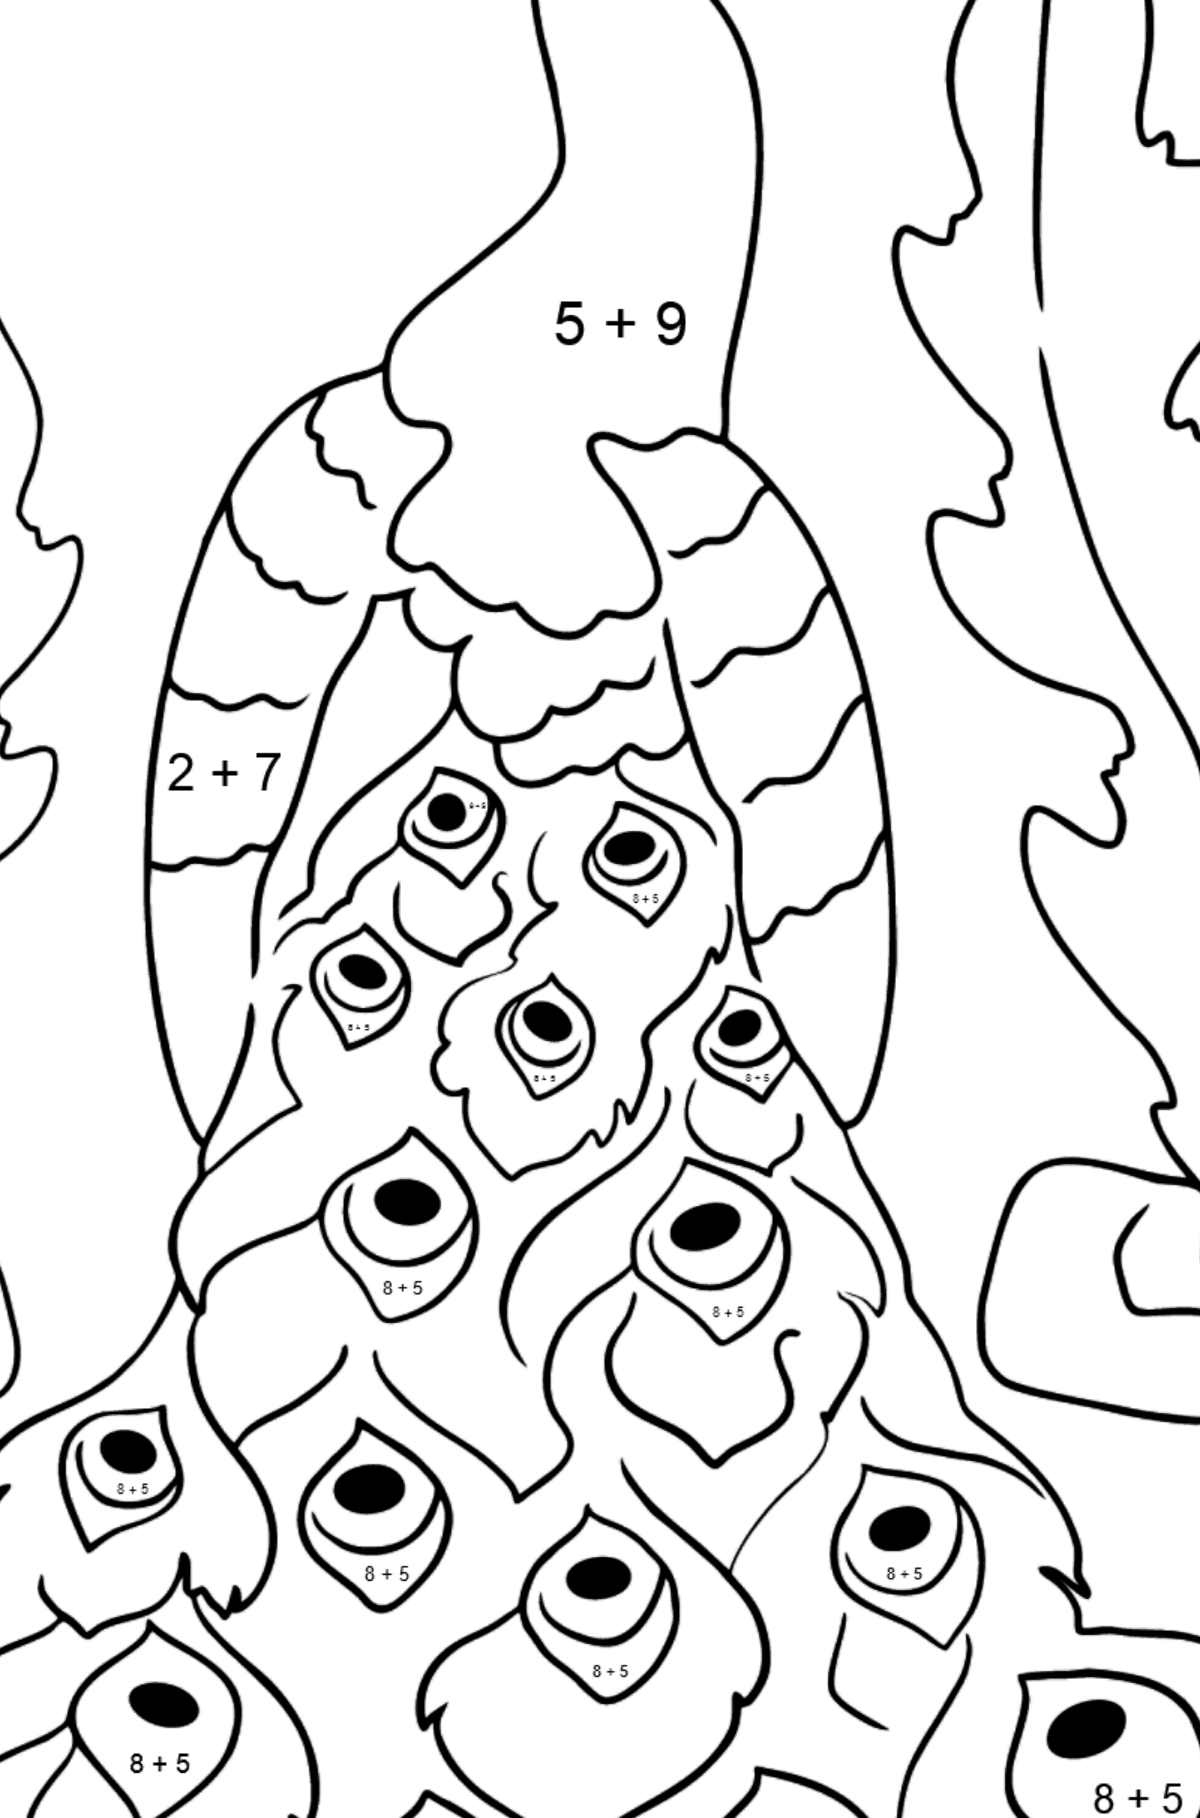 A Pompous and Haughty Peacock Coloring Page - Math Coloring - Addition for Kids